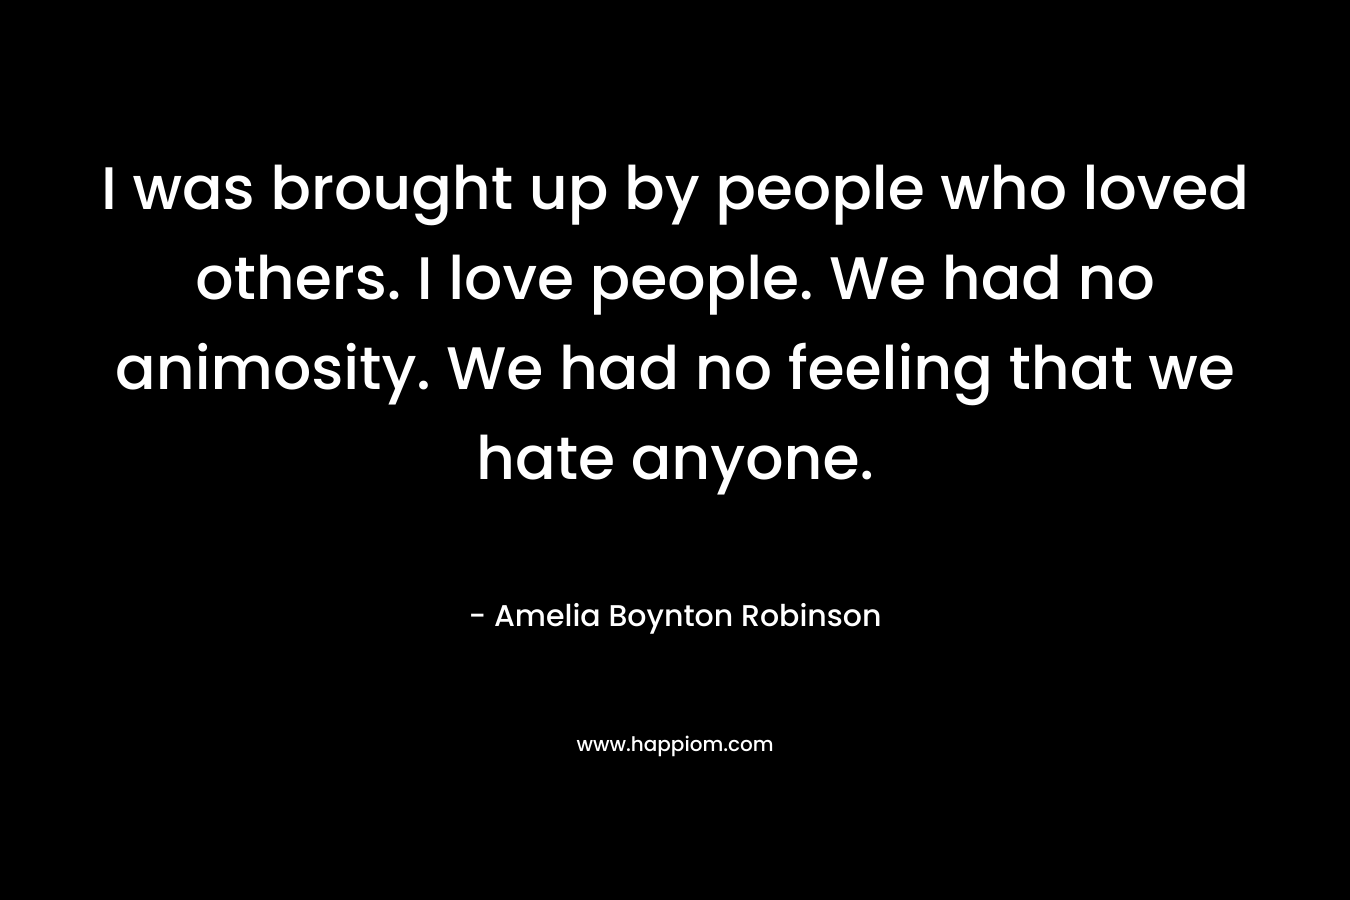 I was brought up by people who loved others. I love people. We had no animosity. We had no feeling that we hate anyone. – Amelia Boynton Robinson